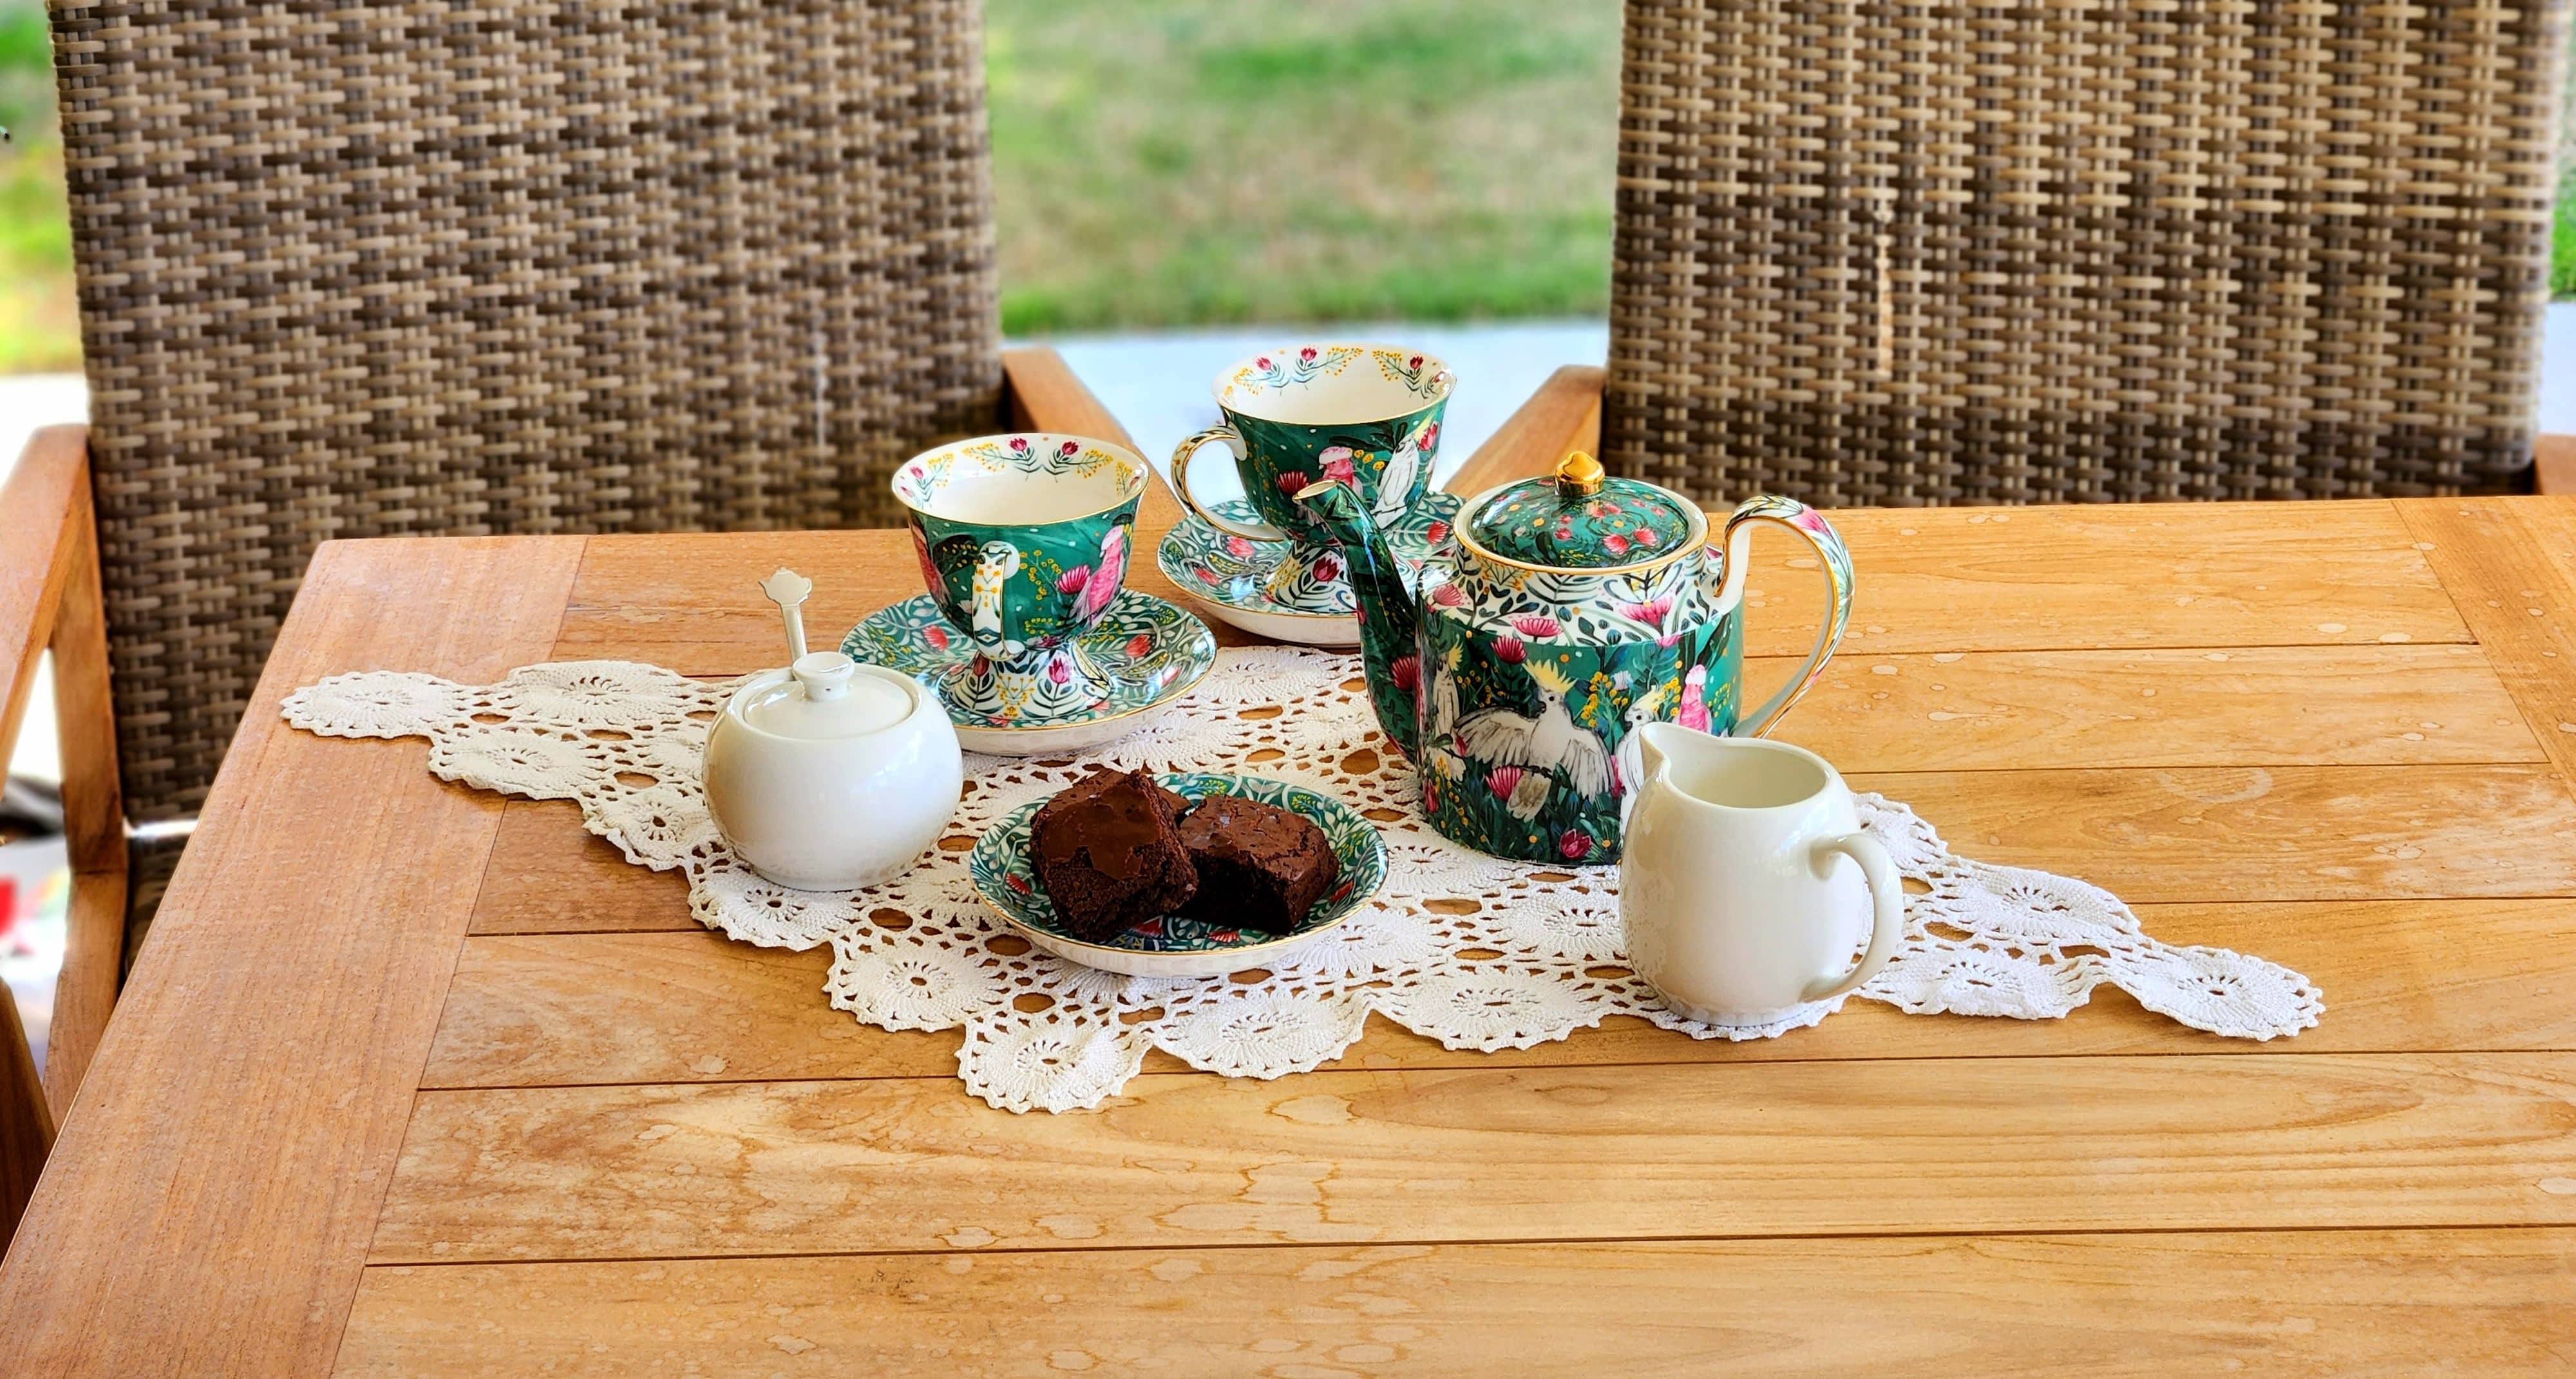 Calm Ordered Tea set taken outside on a wooden table